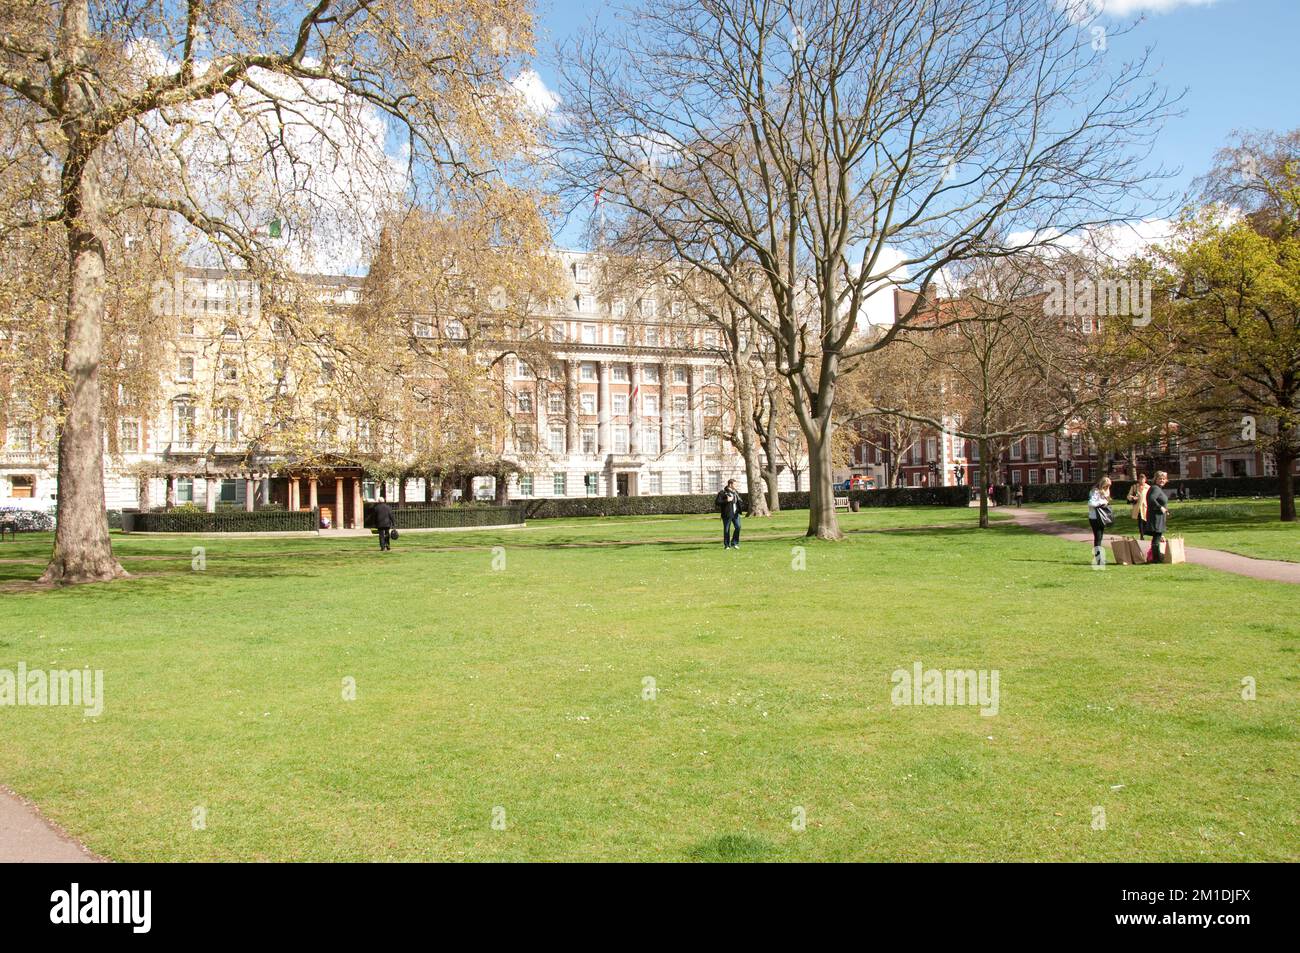 Gardens, Grosvenor Square, Mayfair, Westminster, London, UK - a few people in the garden, Canadian Embassy at far end. Stock Photo